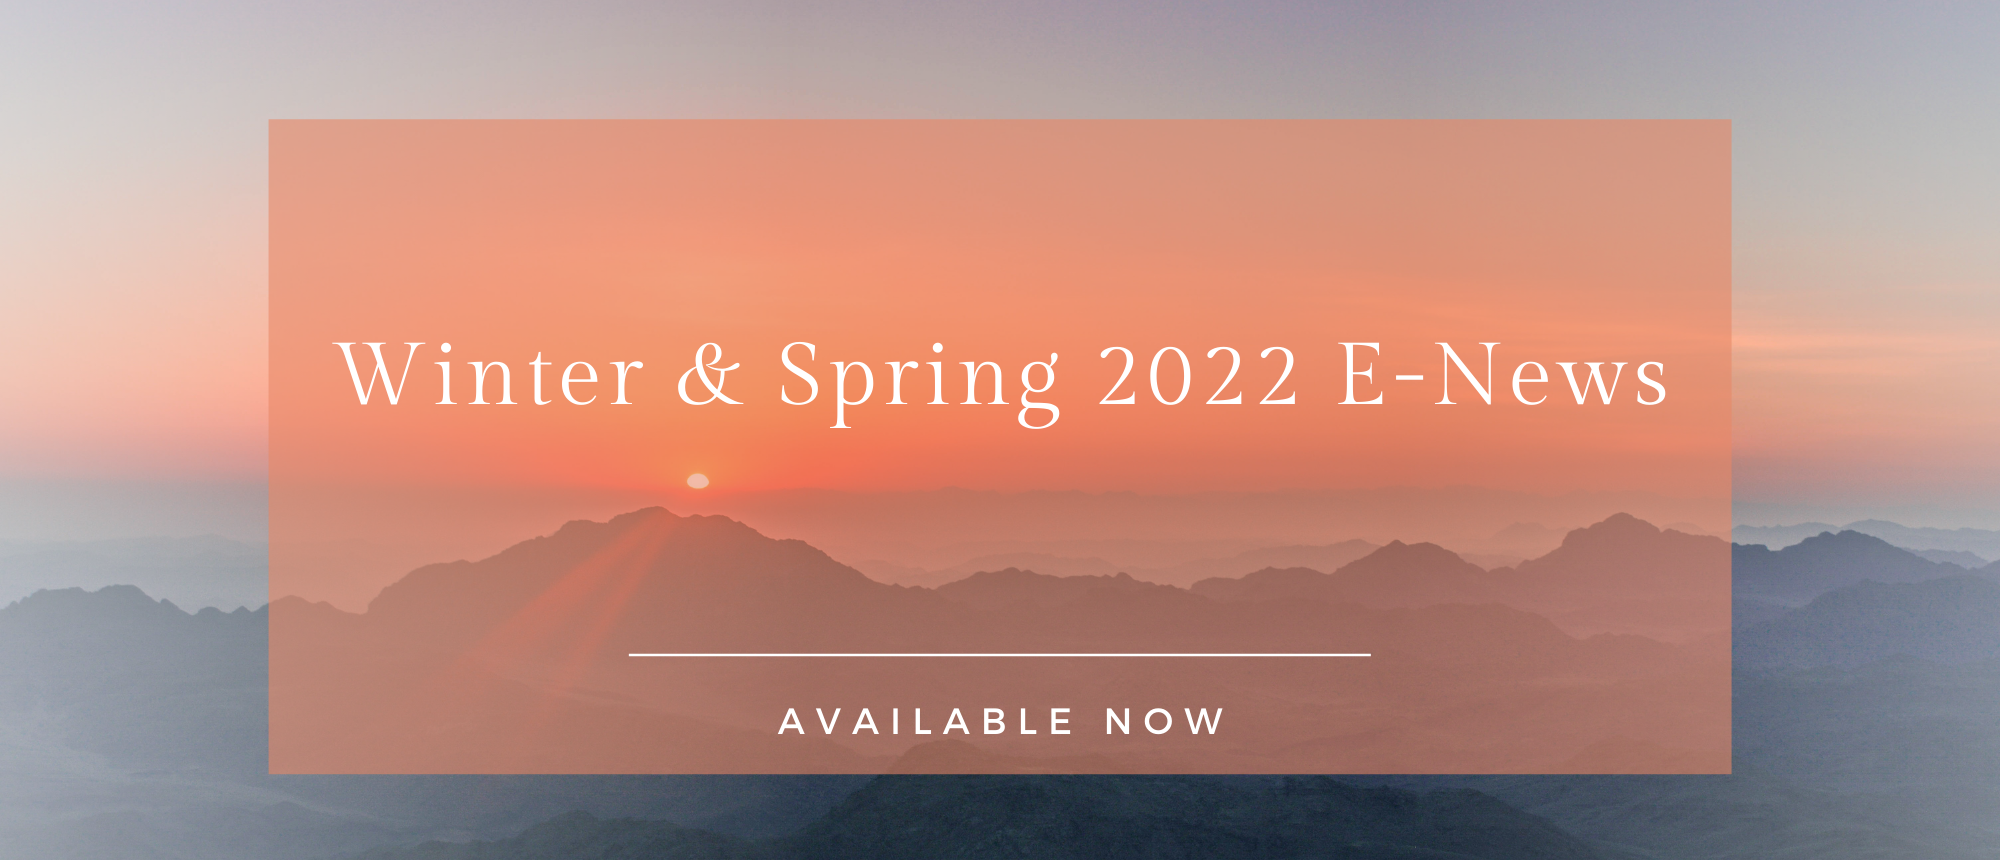 A sunset in the background with the words "Winter & Spring 2022 E-News / Available Now"